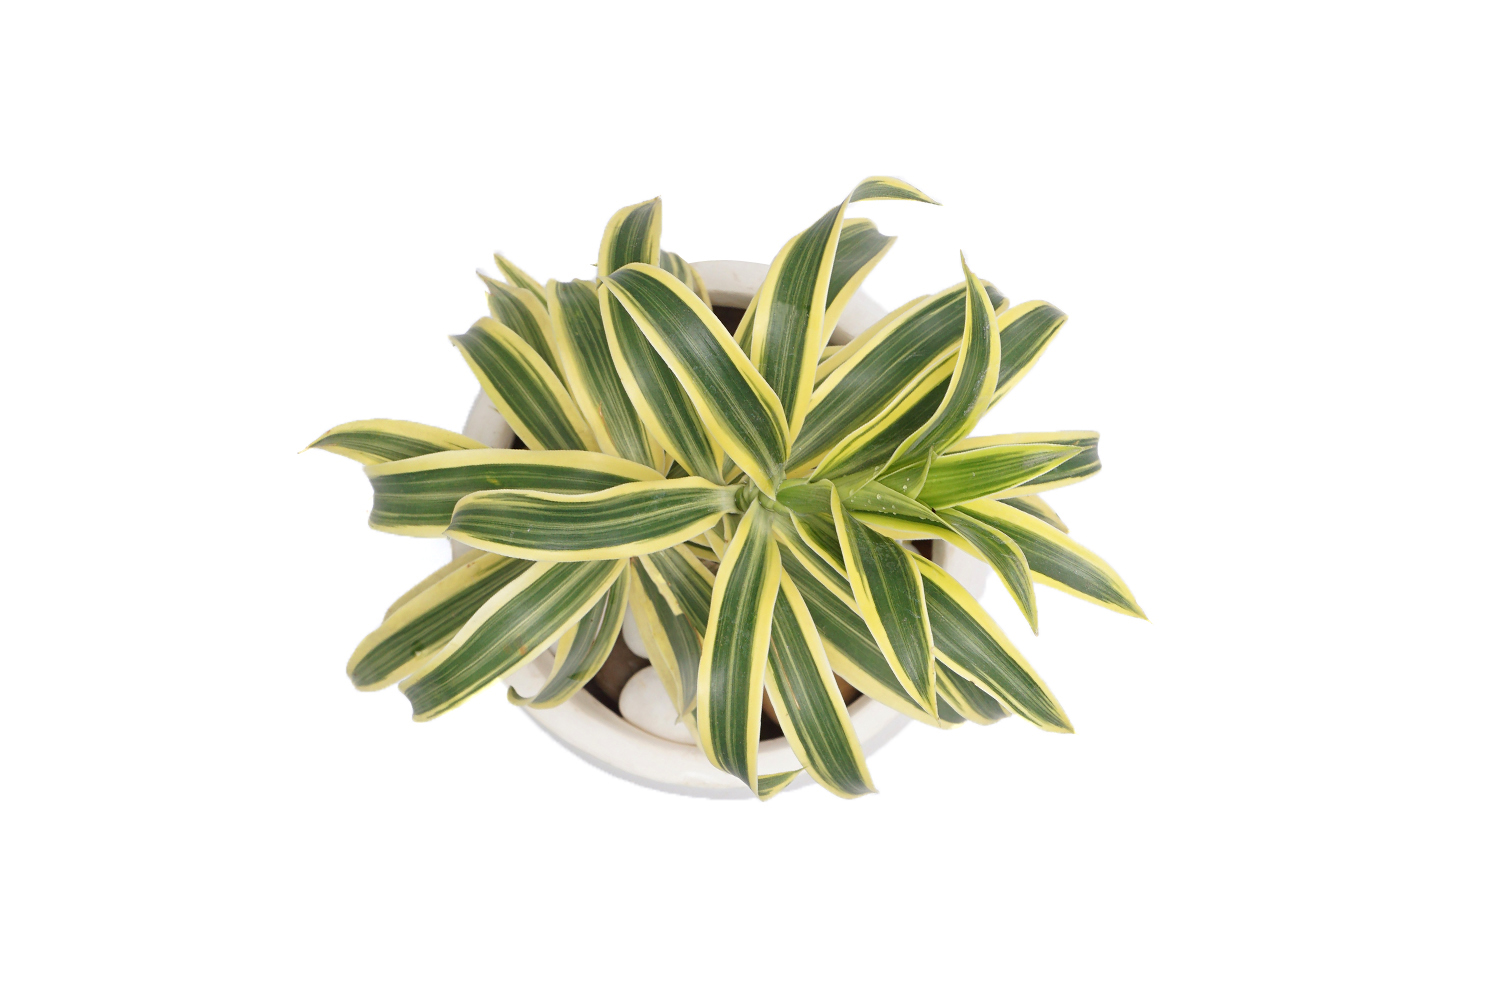 Buy  Dracena Plants , White Pots and seeds in Delhi NCR by the best online nursery shop Greendecor.